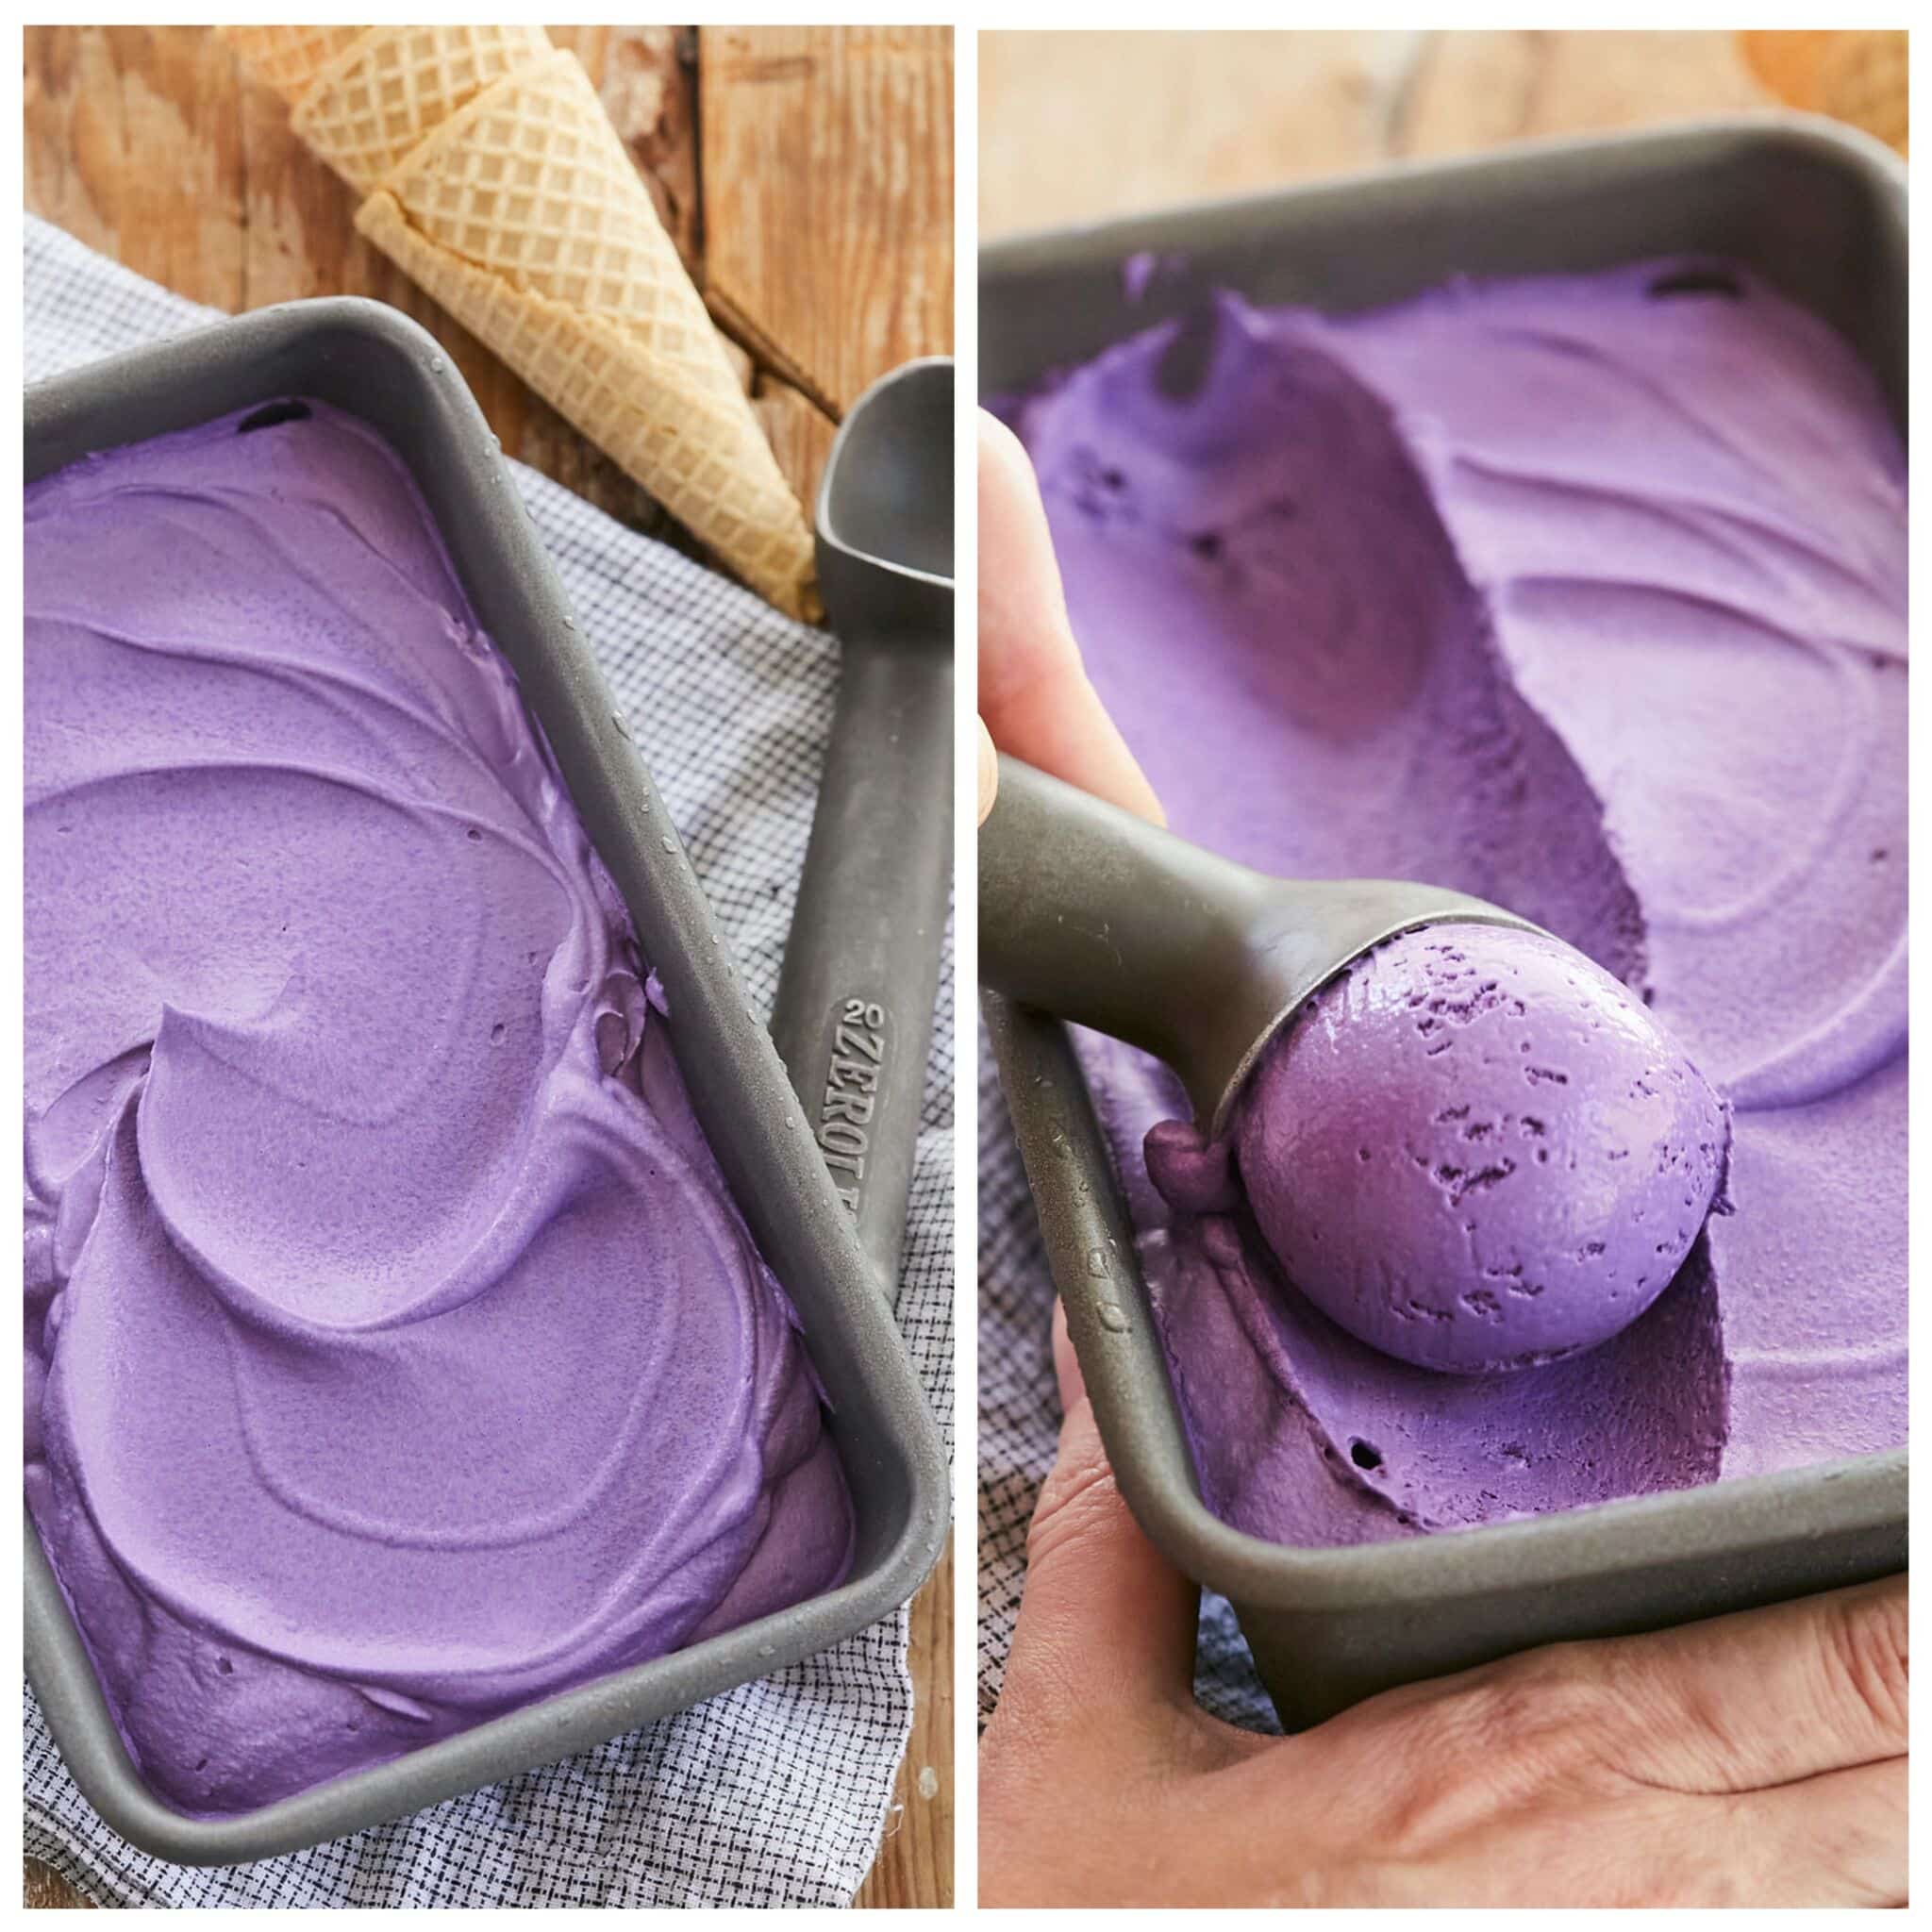 In the left picture, purple rich velvety ube ice cream in a standard loaf pan, with ice cream cones and a scoop on the side. In the right picture, the rich velvety ube ice cream is being scooped from the loaf pan. 